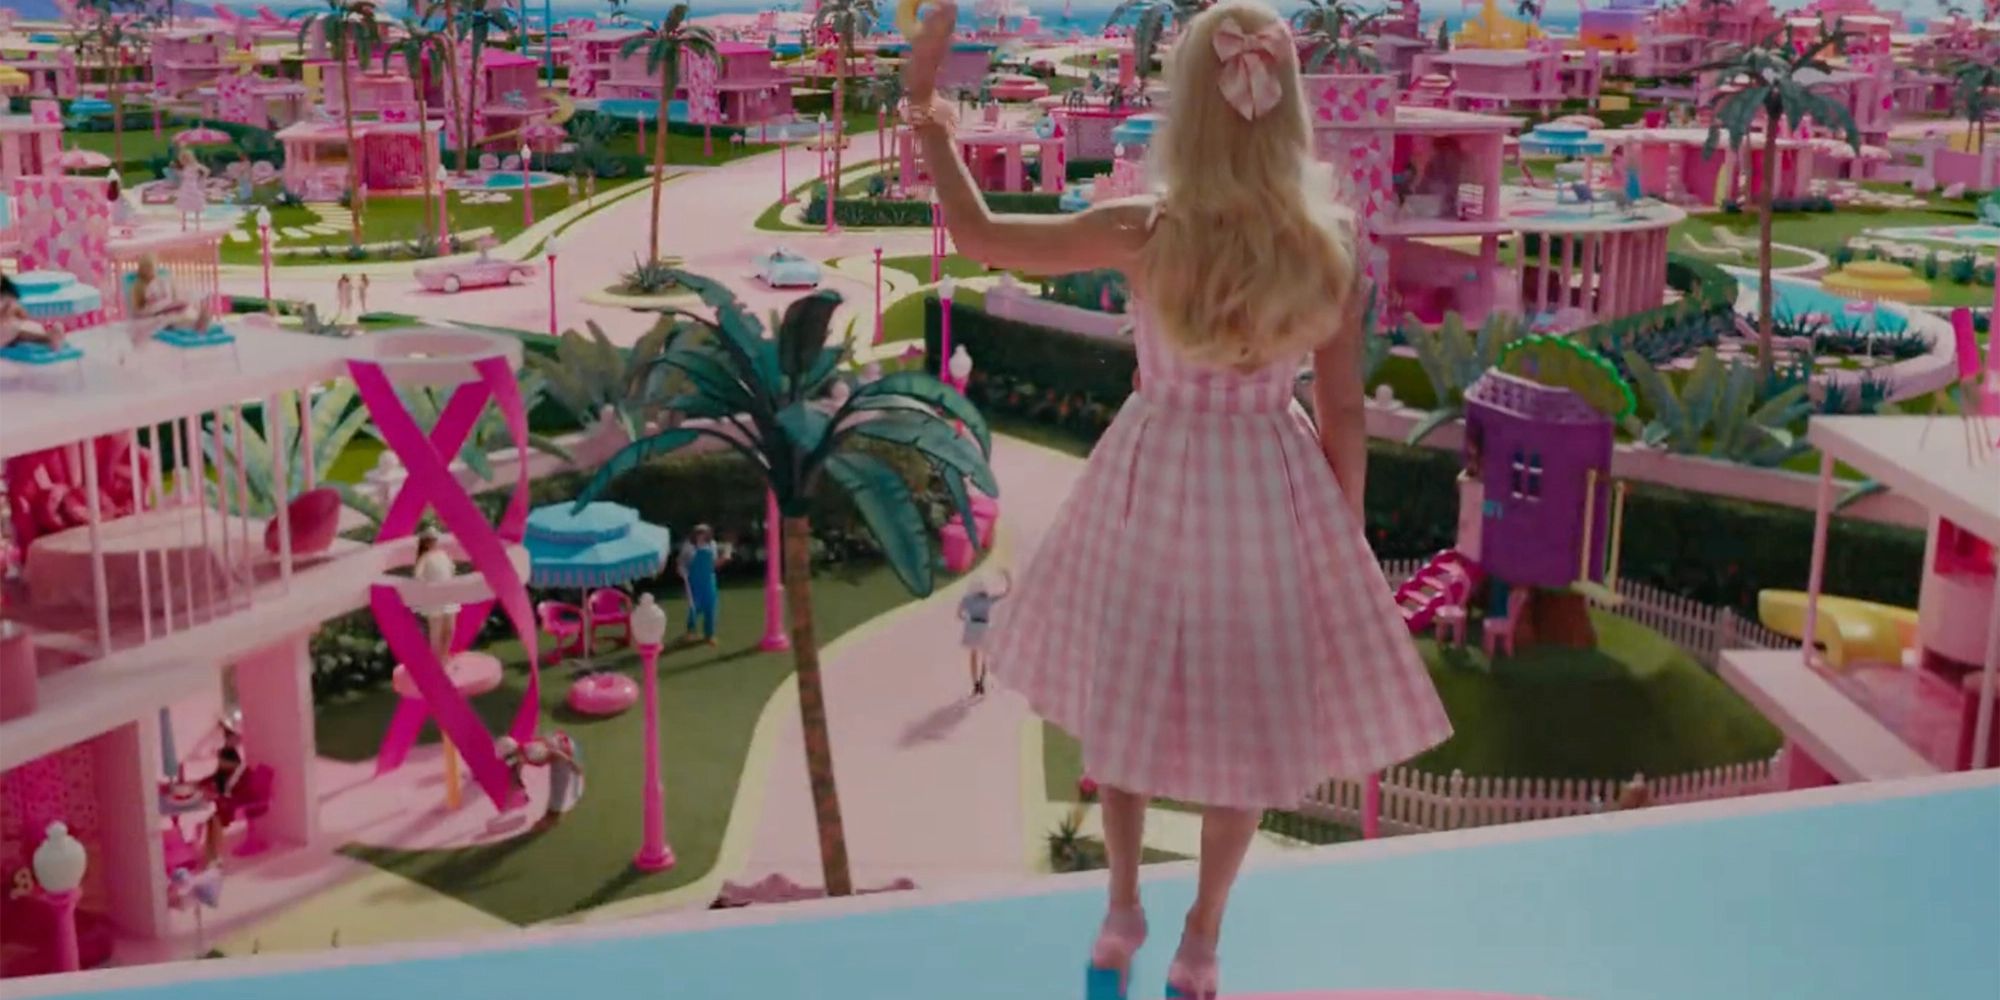 Margot Robbie waves in a pastel pink toy town in the Barbie movie